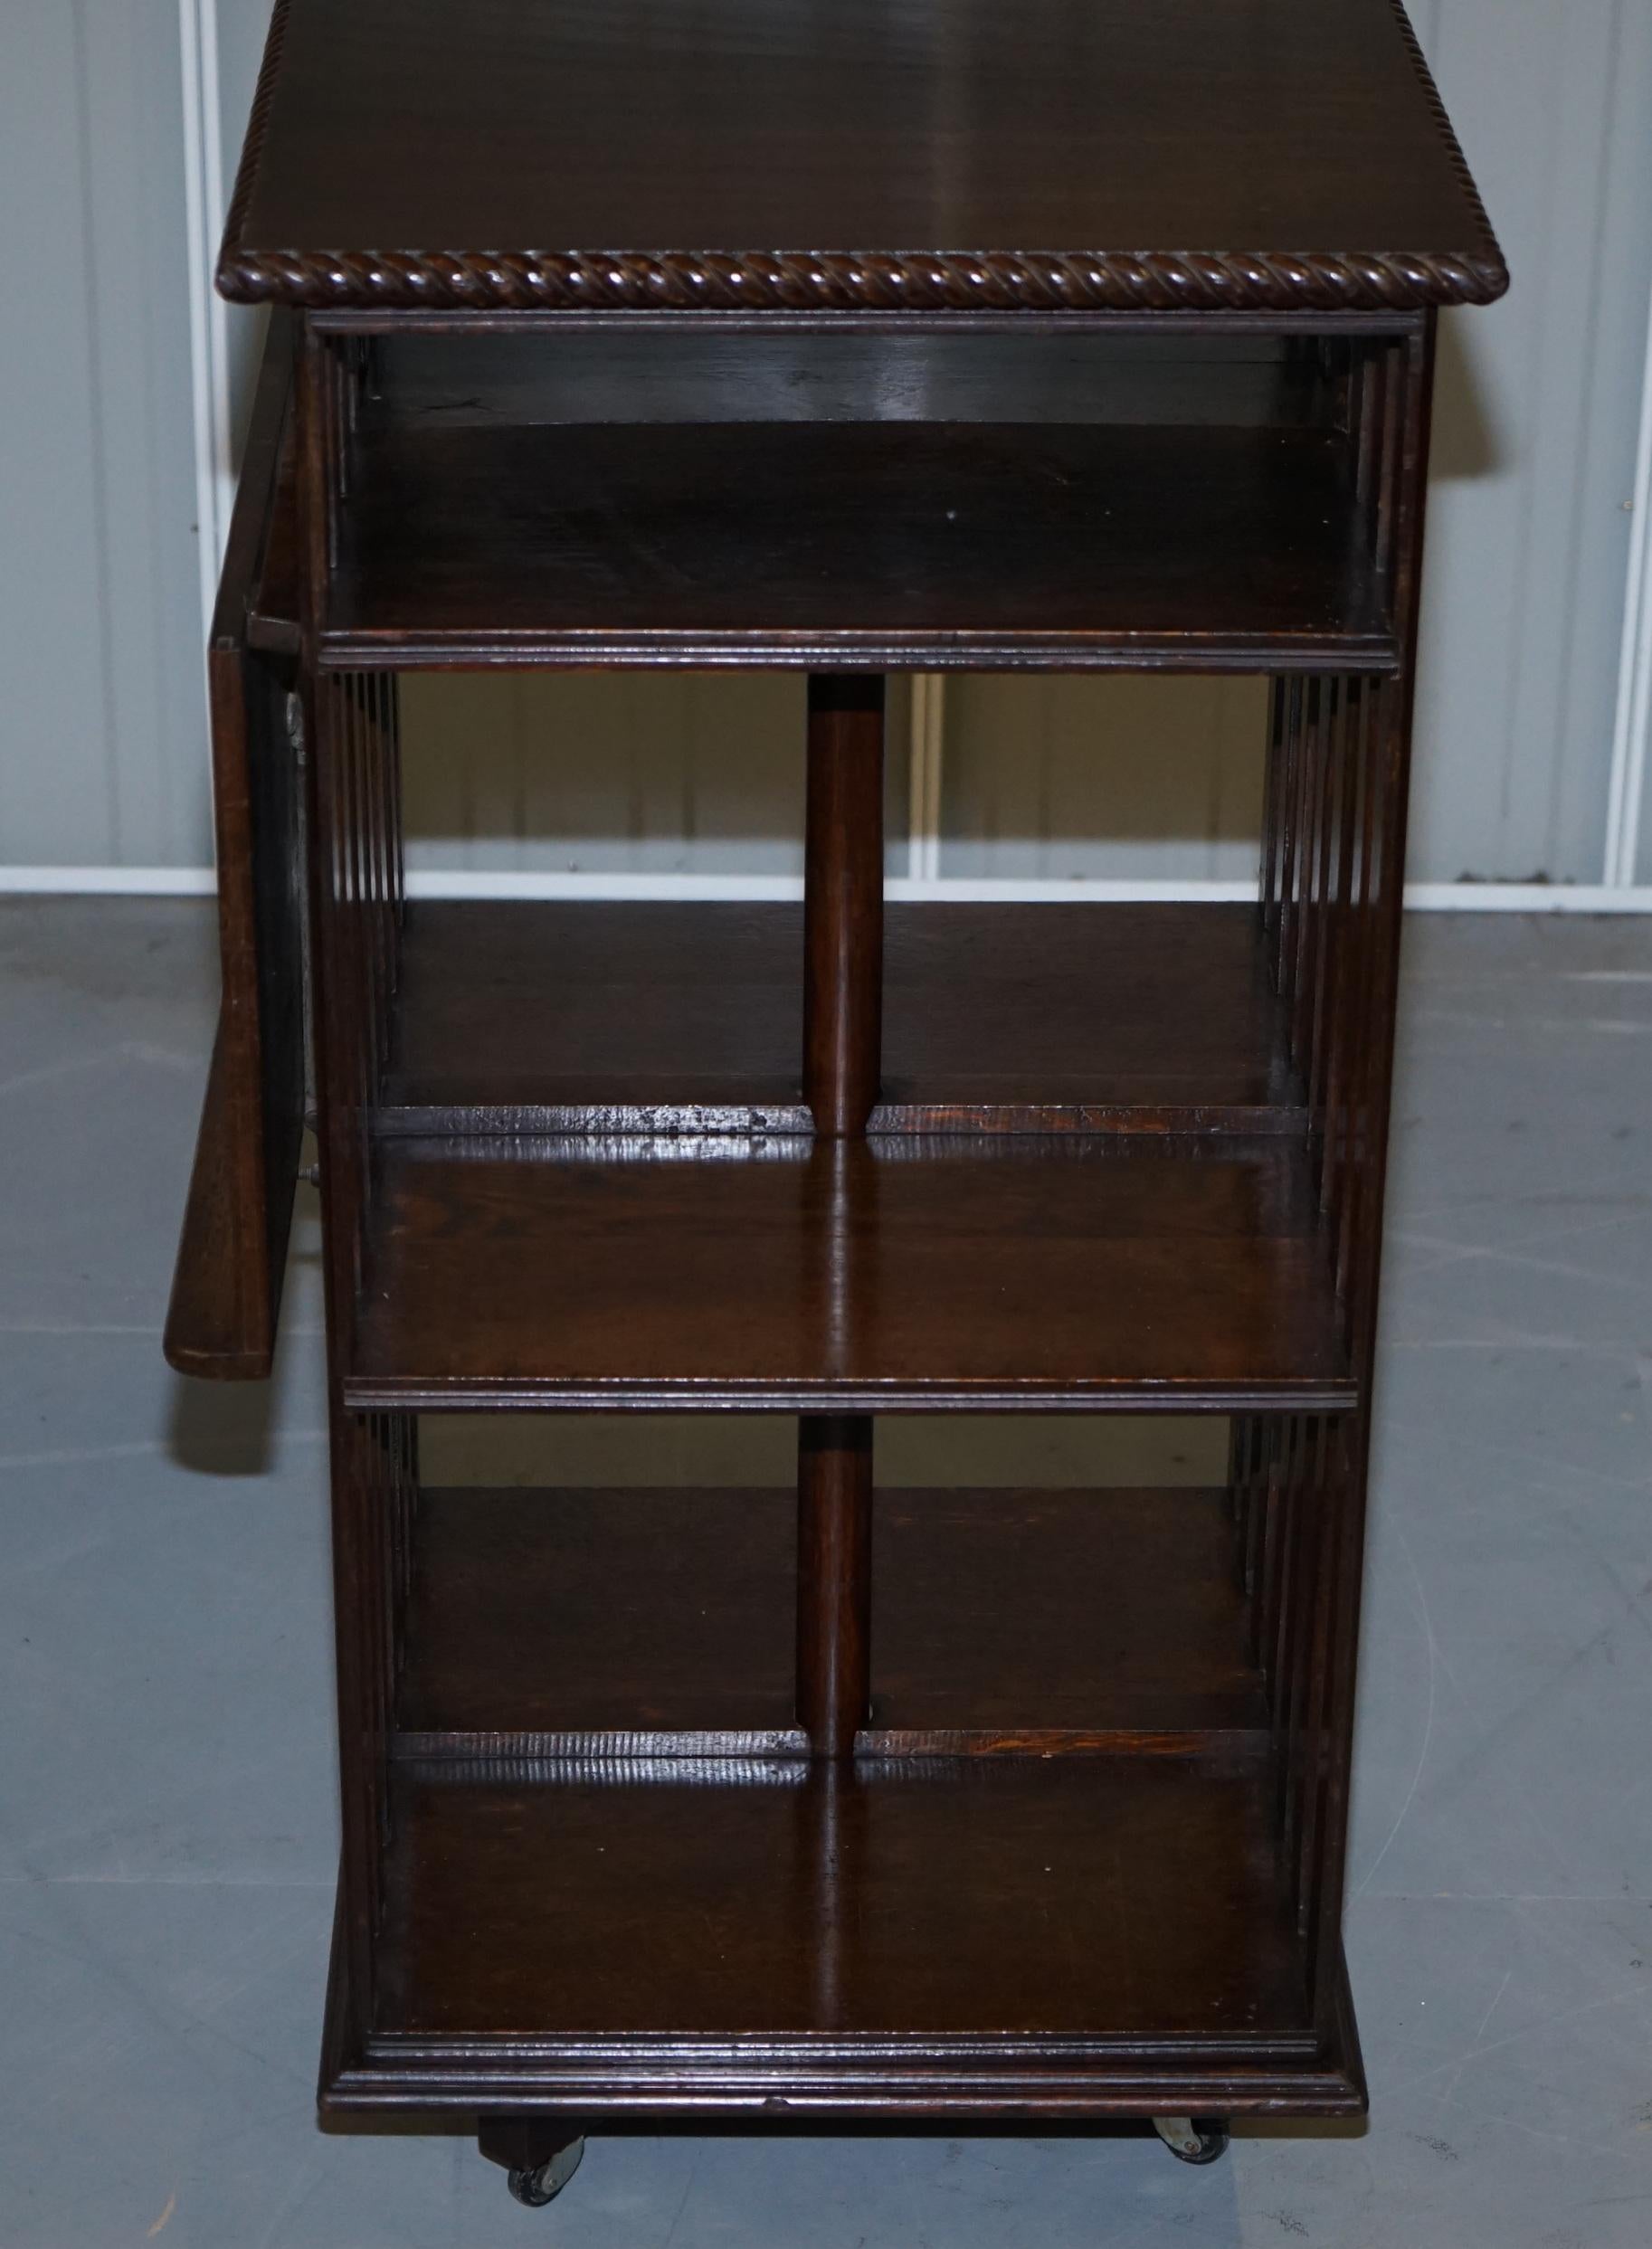 Early 20th Century Lovely circa 1900 Edwardian Solid Oak Revolving Bookcase with Lift Up Desk Piece